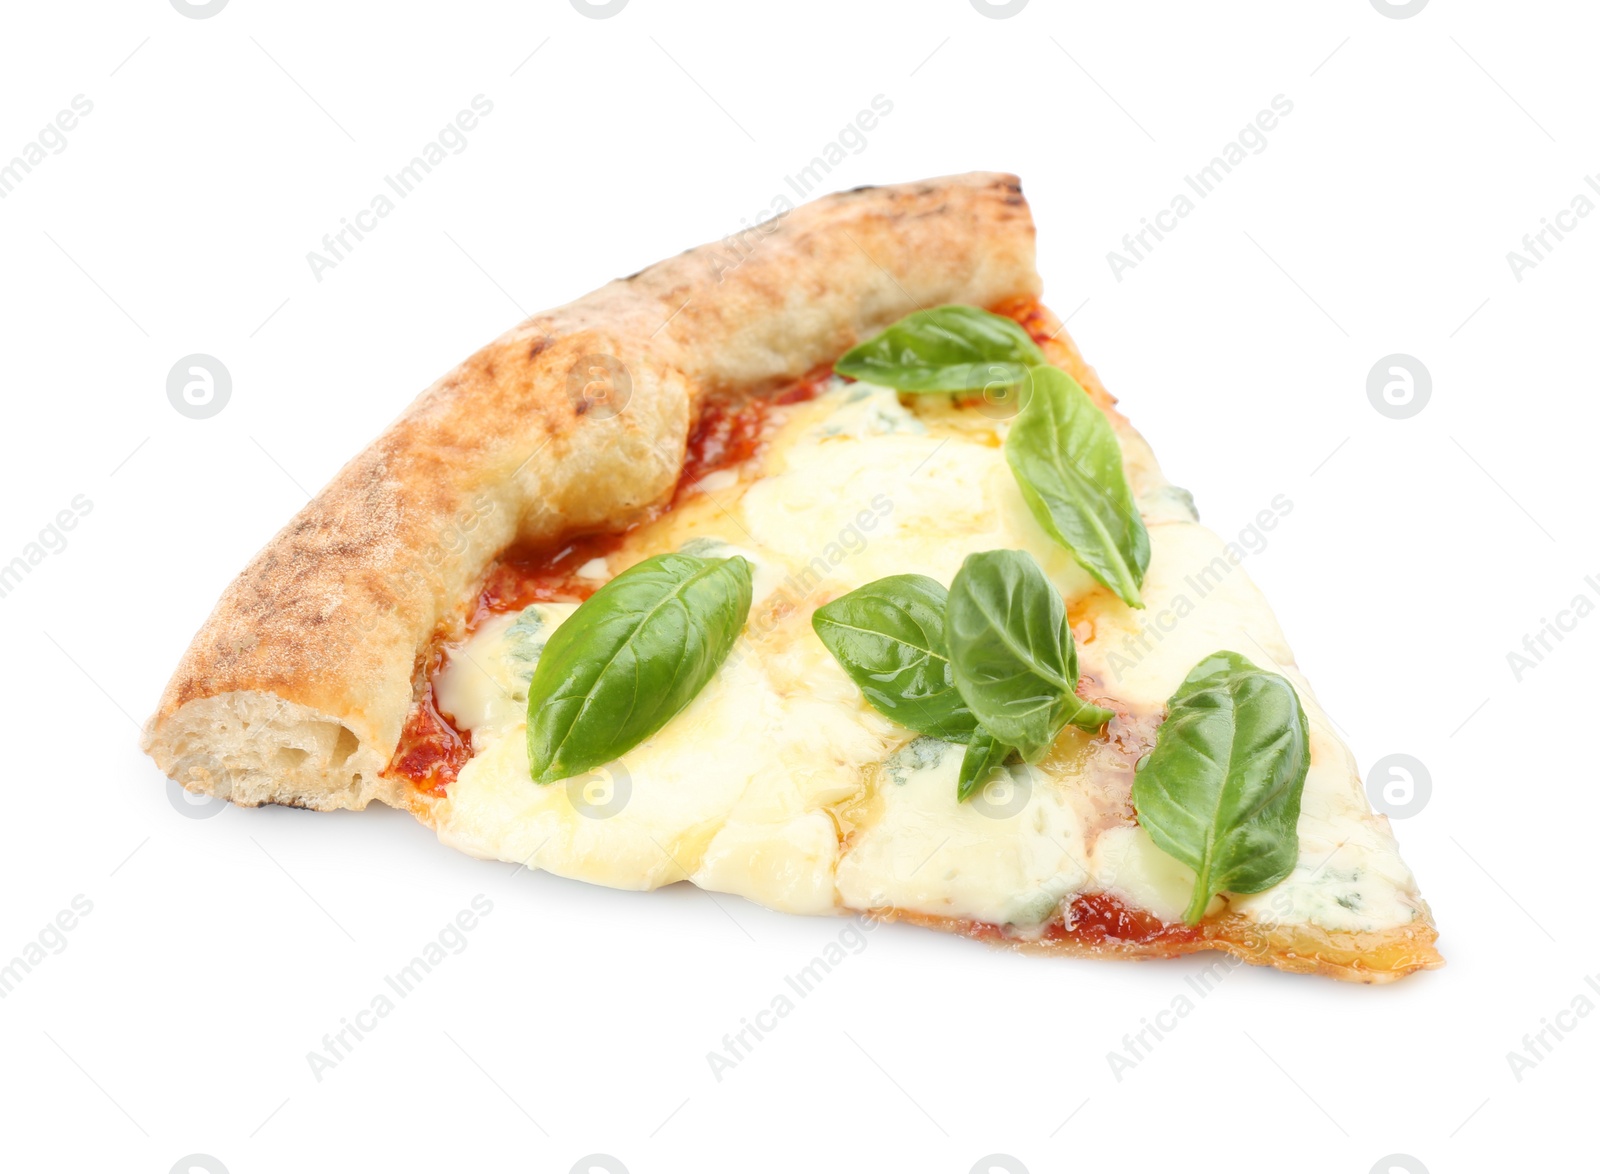 Photo of Slicedelicious pizza on white background